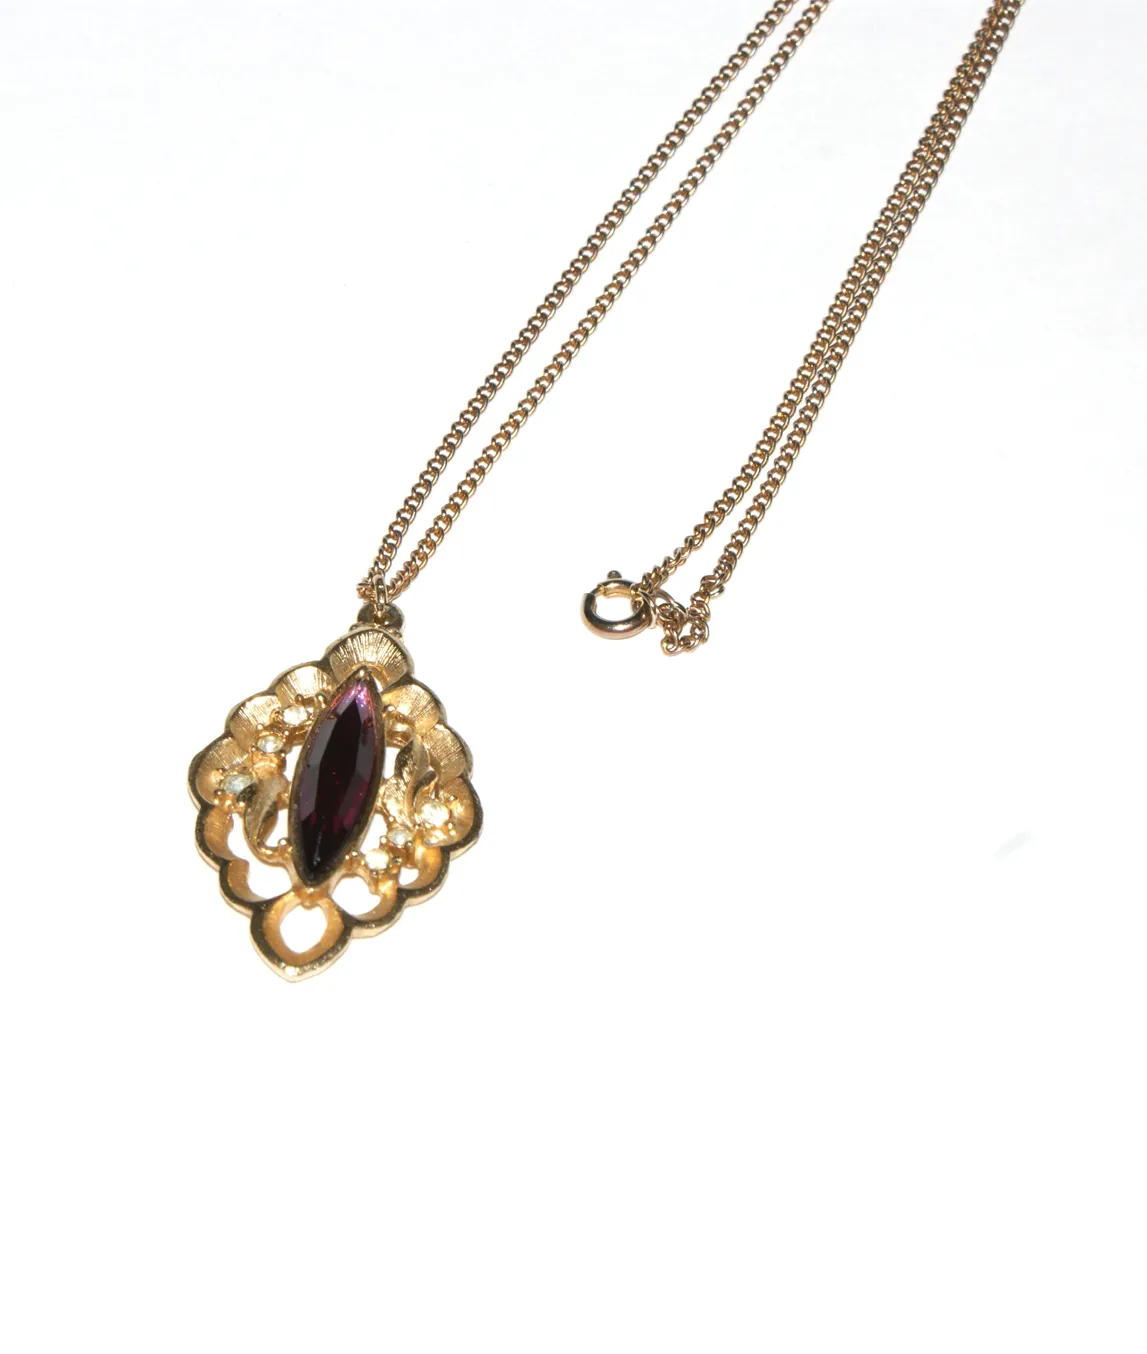 Sarah Coventry pendant with chain